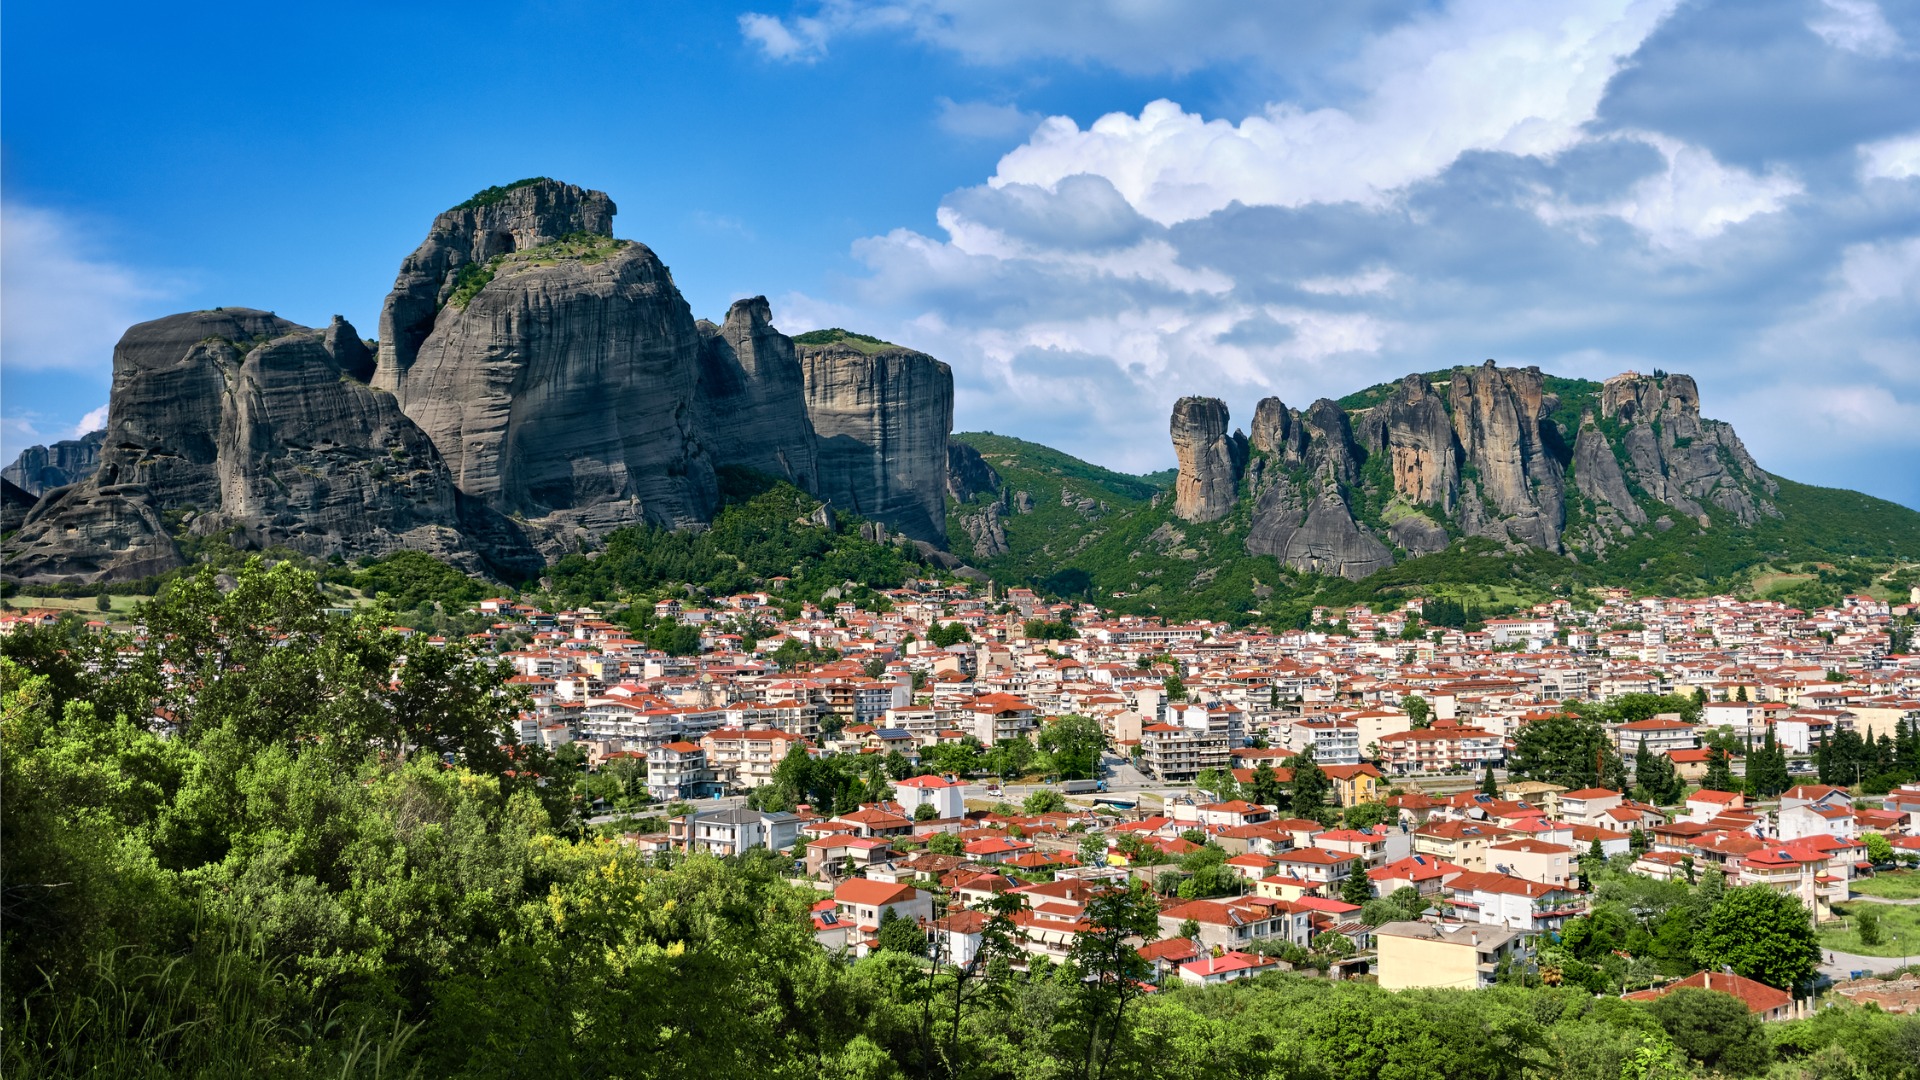 This image shows the town of Kalabaka with the Meteora rocks soaring above it in the background. 